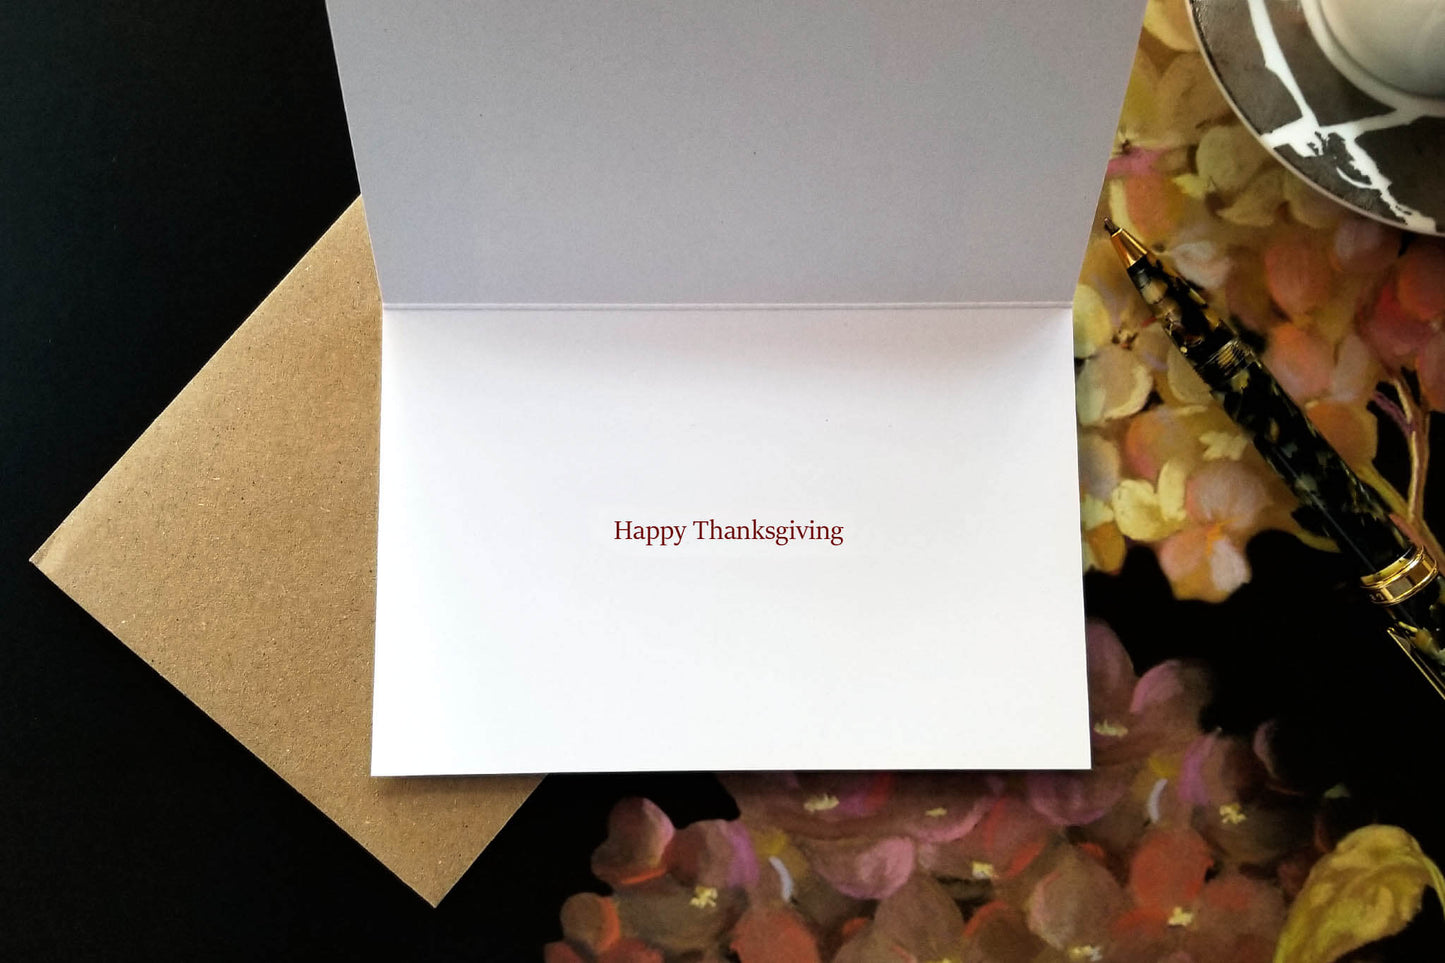 Psalm 145:10 eco Christian greeting card with Happy Thanksgiving inside